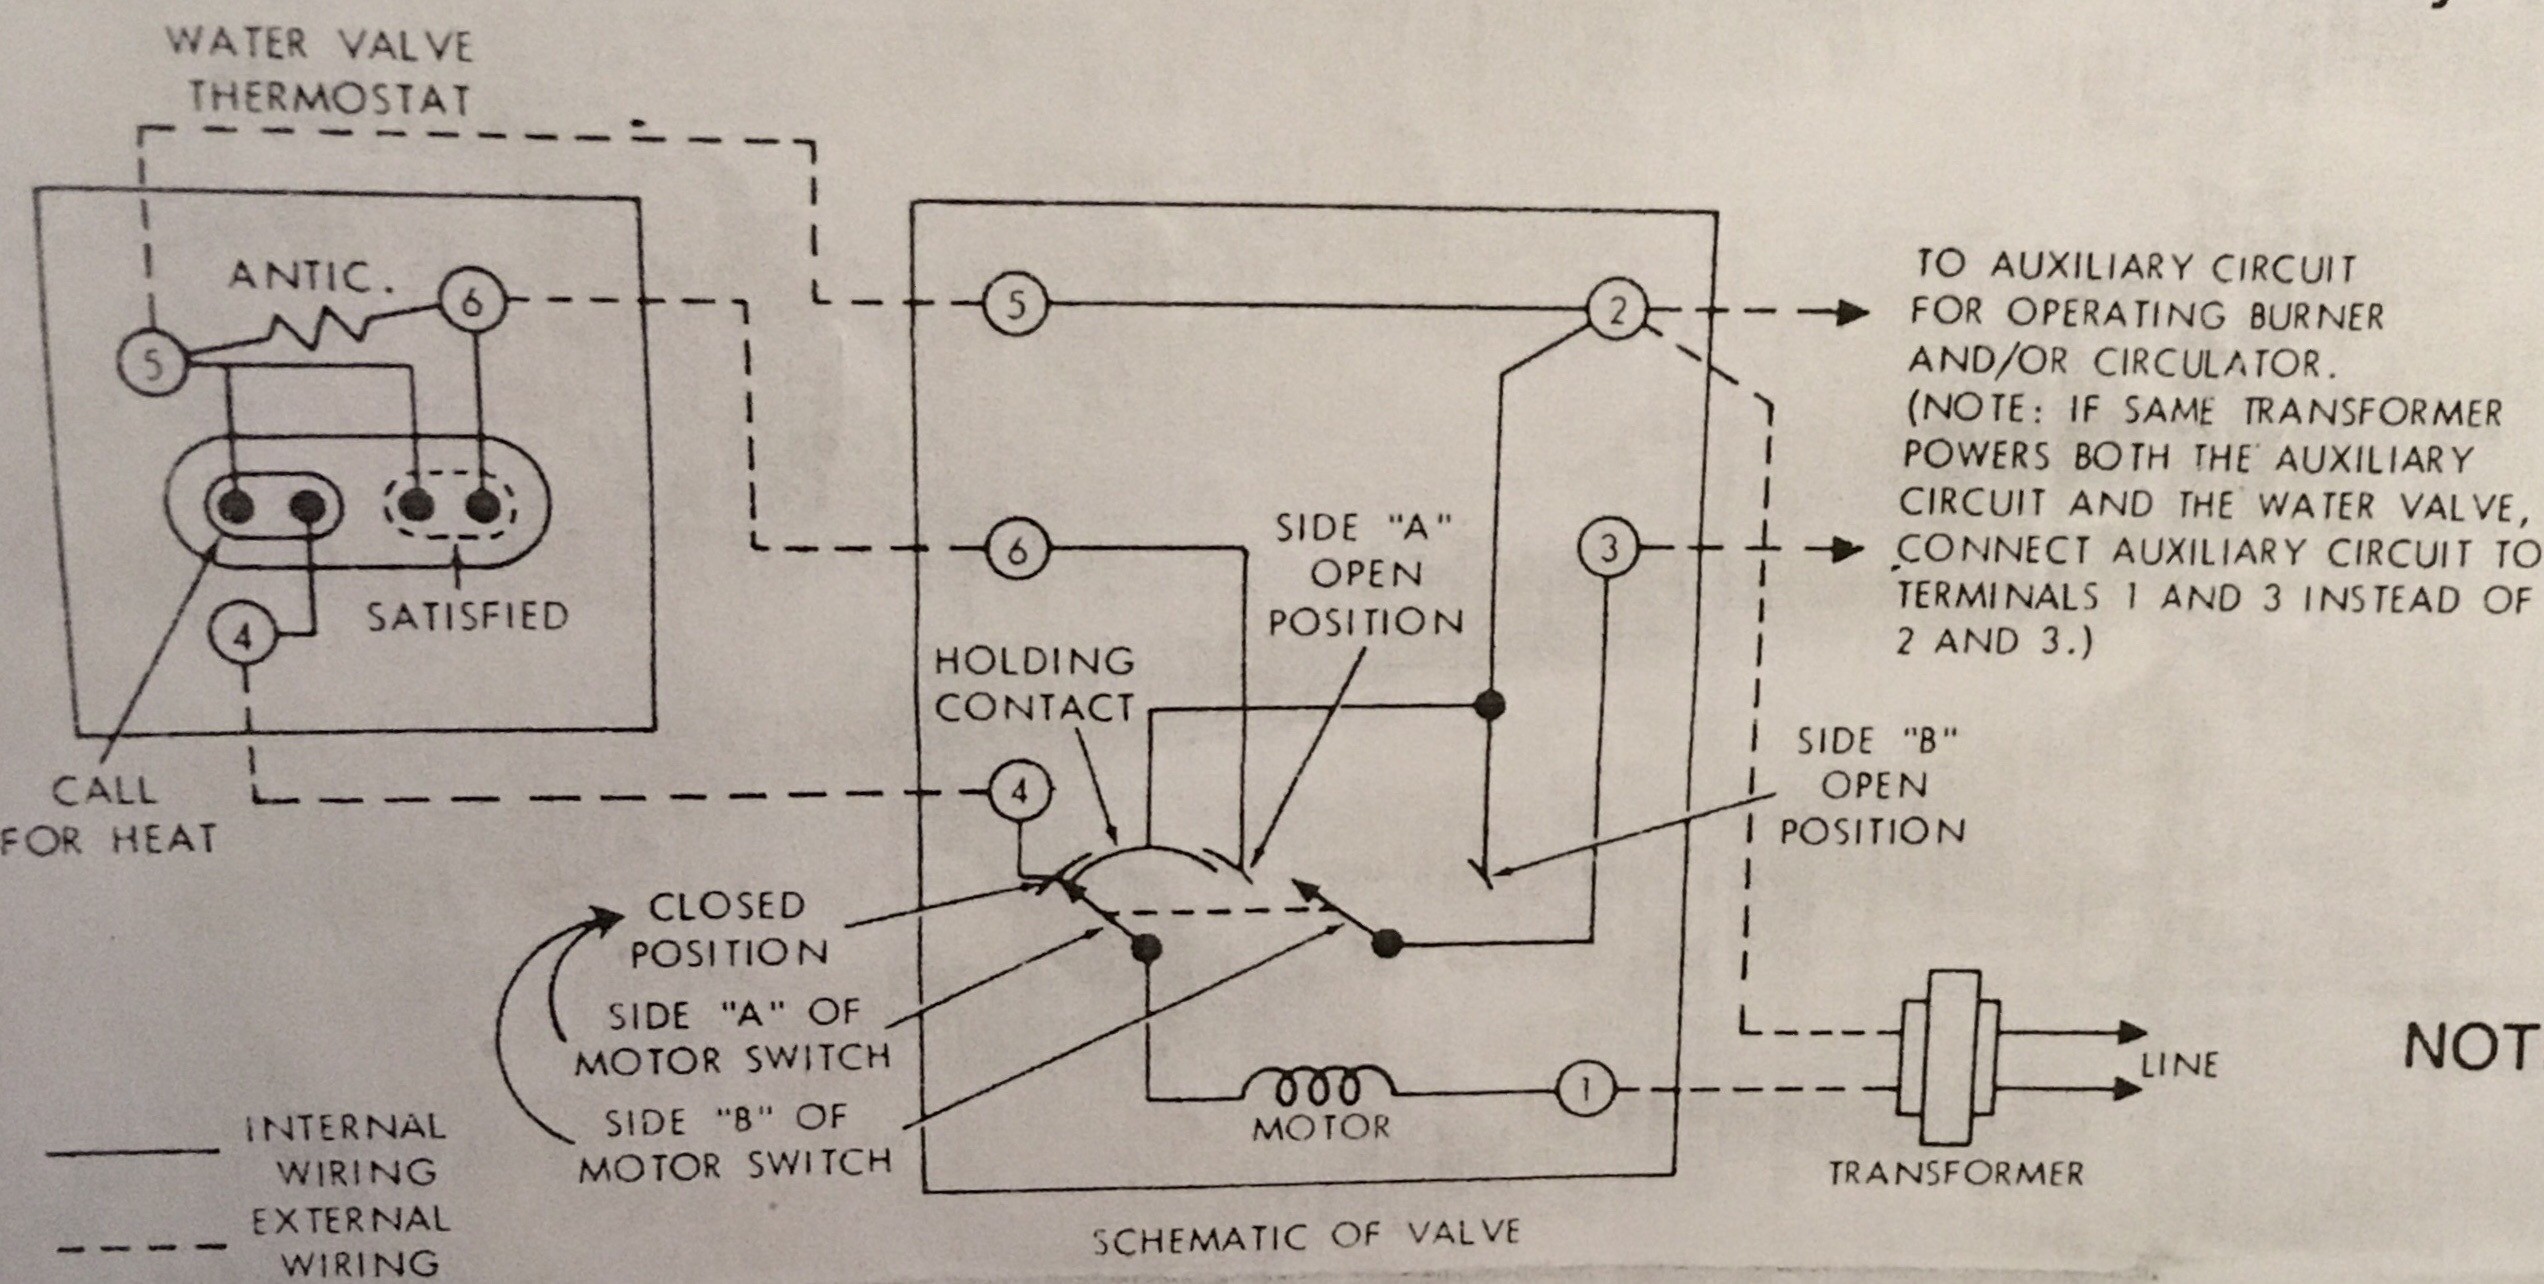 White Rodgers Zone Valve Wiring Diagram How Can I Add Additional Circulator Relay to Existing thermostat Of White Rodgers Zone Valve Wiring Diagram